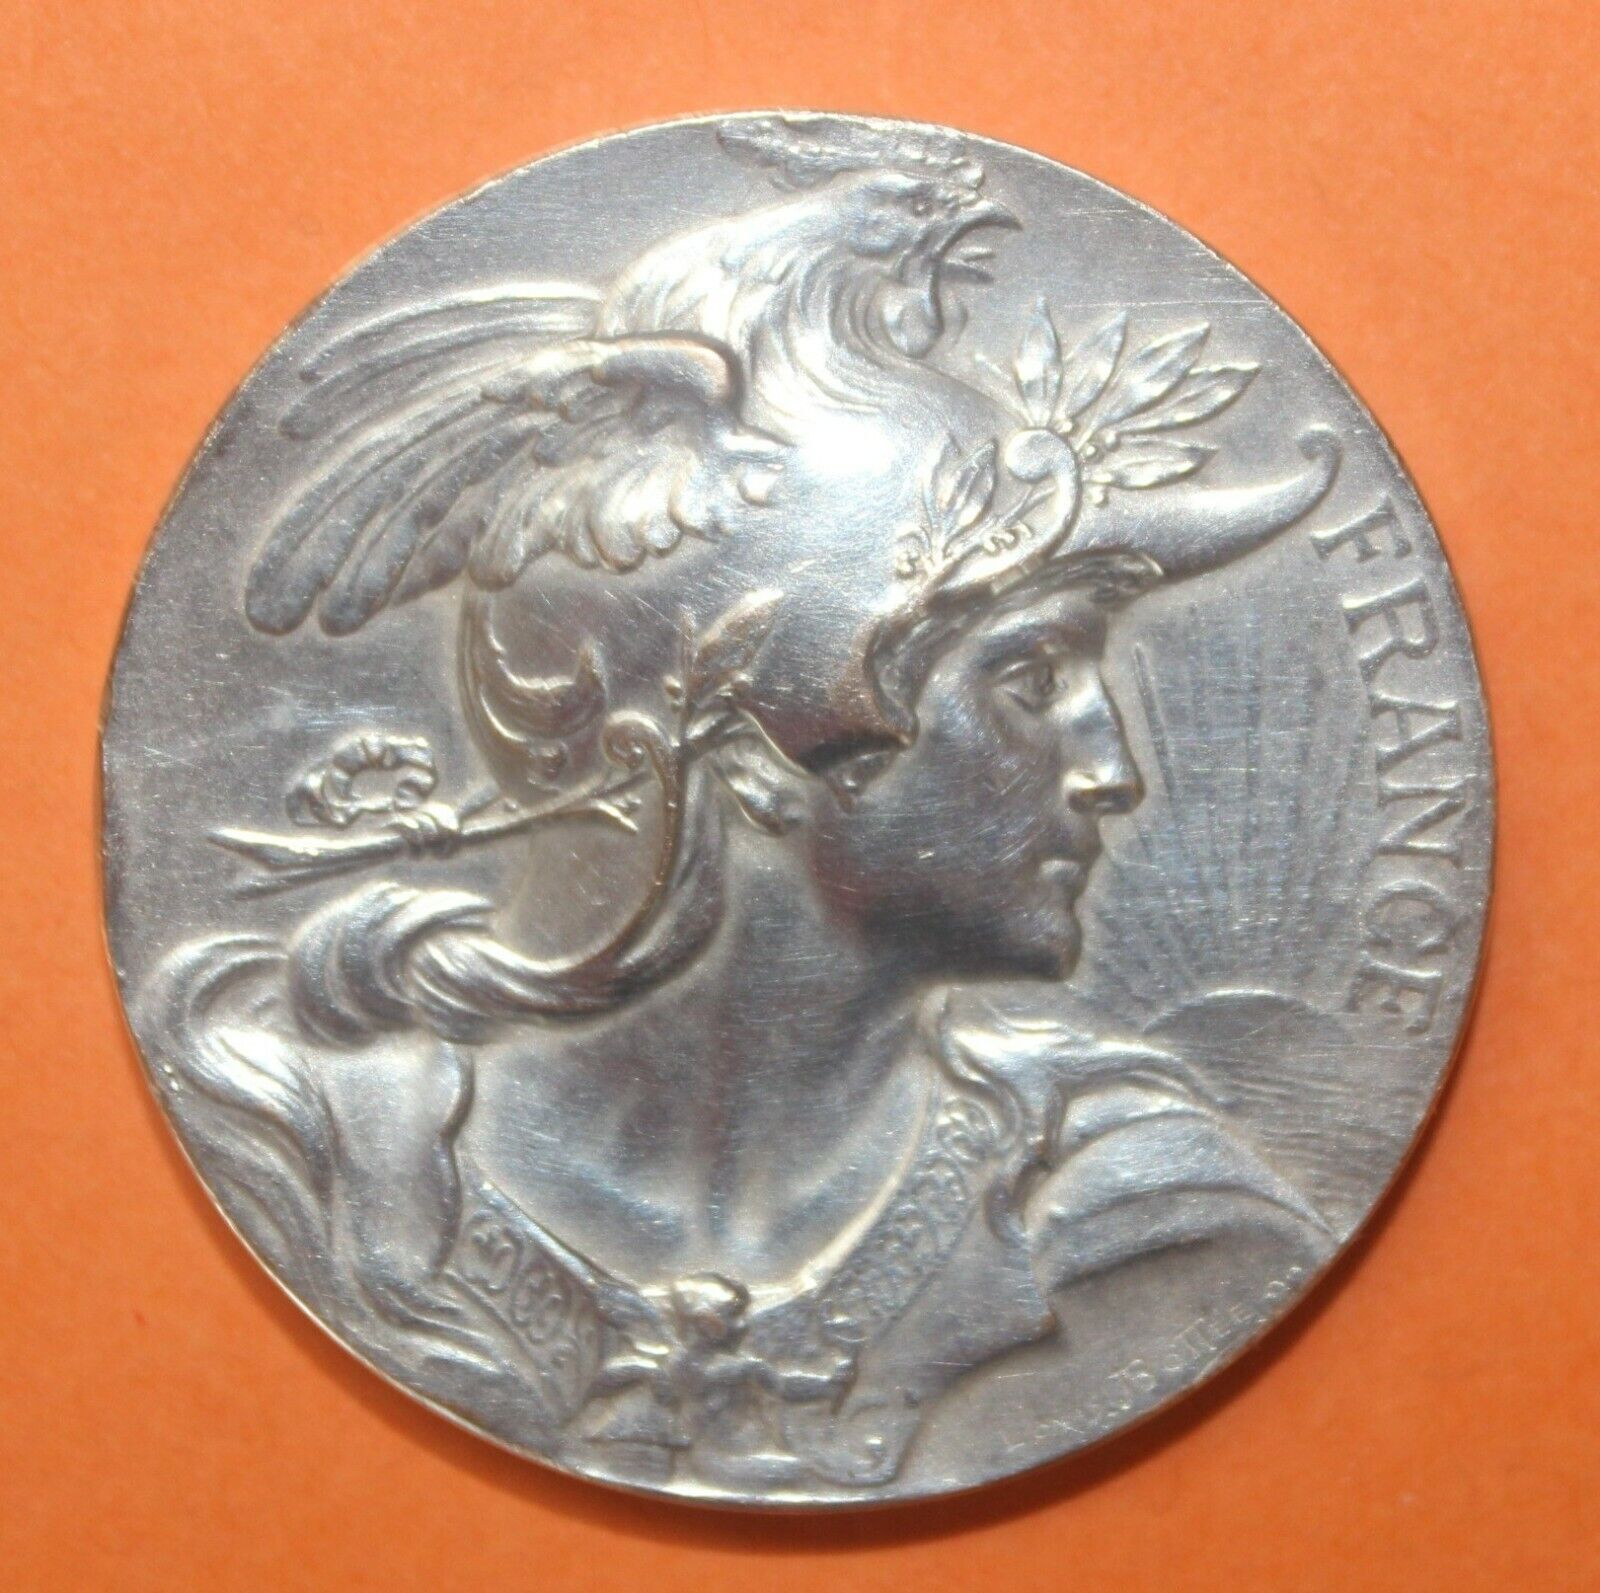 Antique Engraved Medal Louis Bottee France Silvered Art Nouveau Marianne 1900's